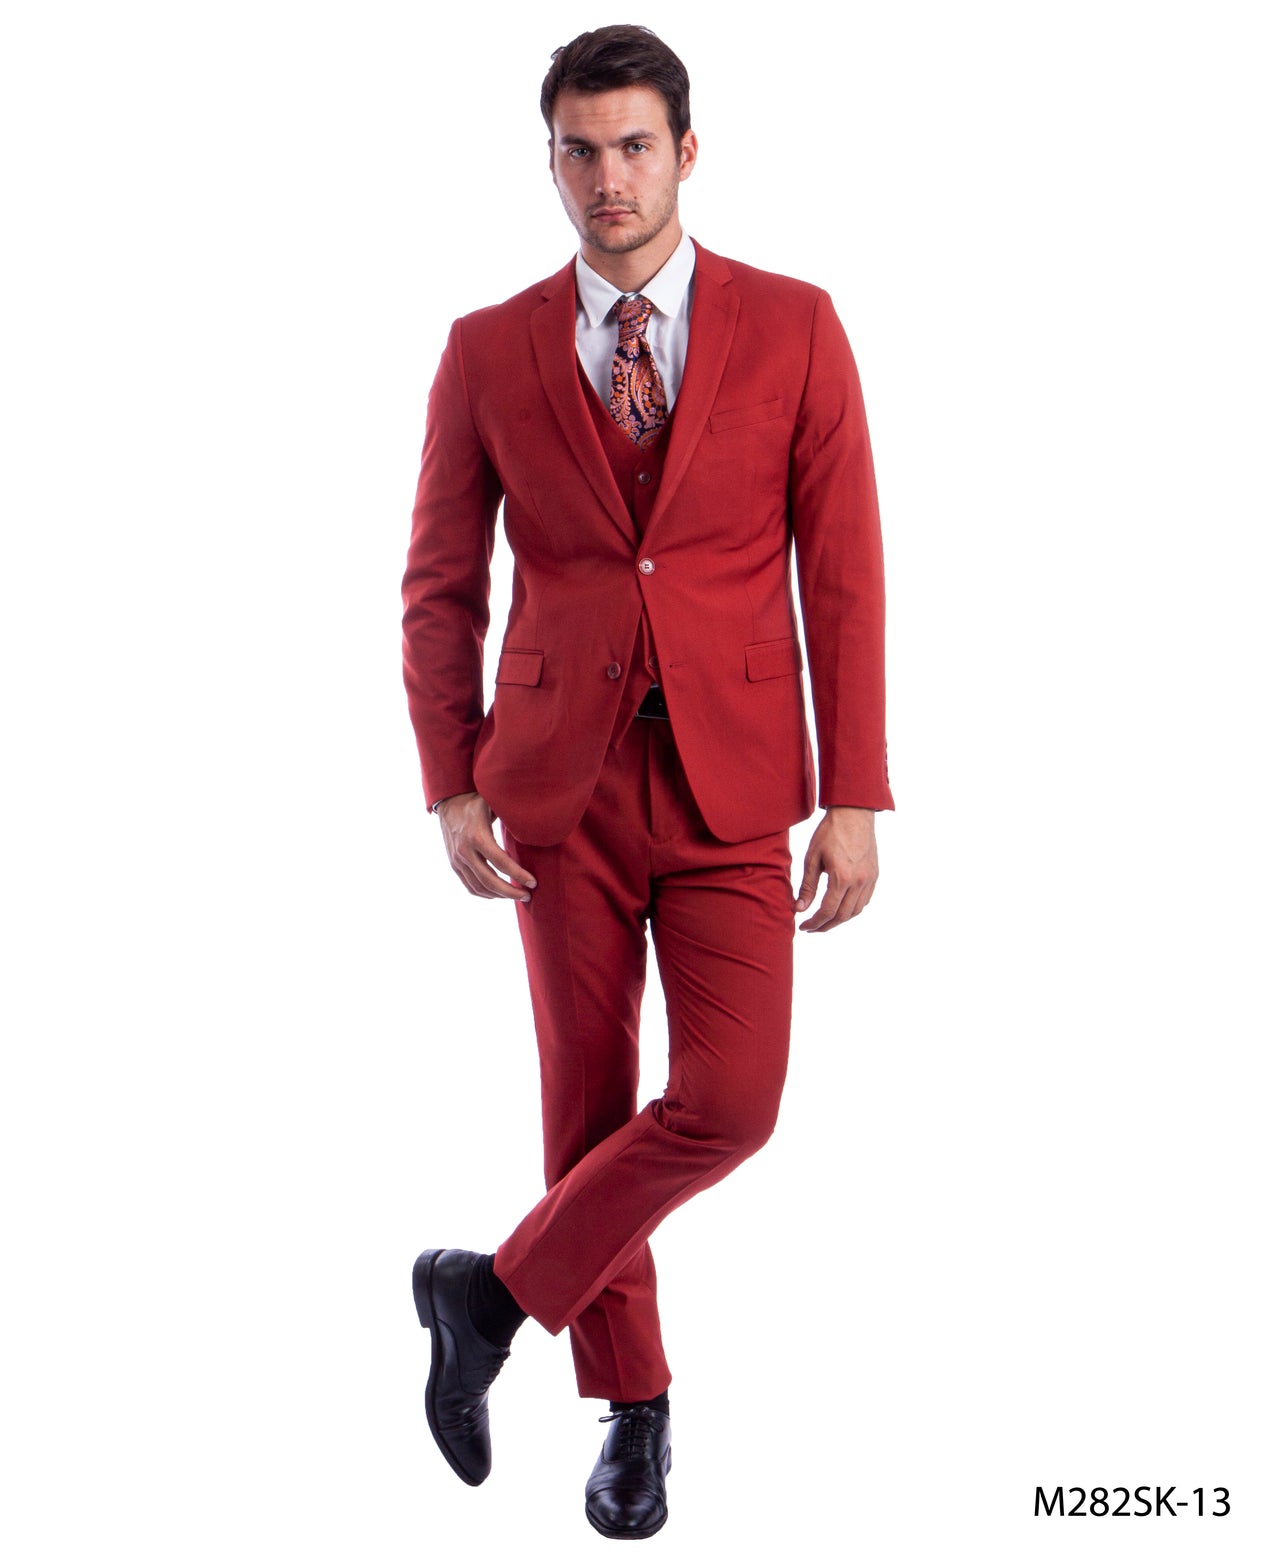 Brick Suit For Men Formal Suits For All Ocassions - Hattitude